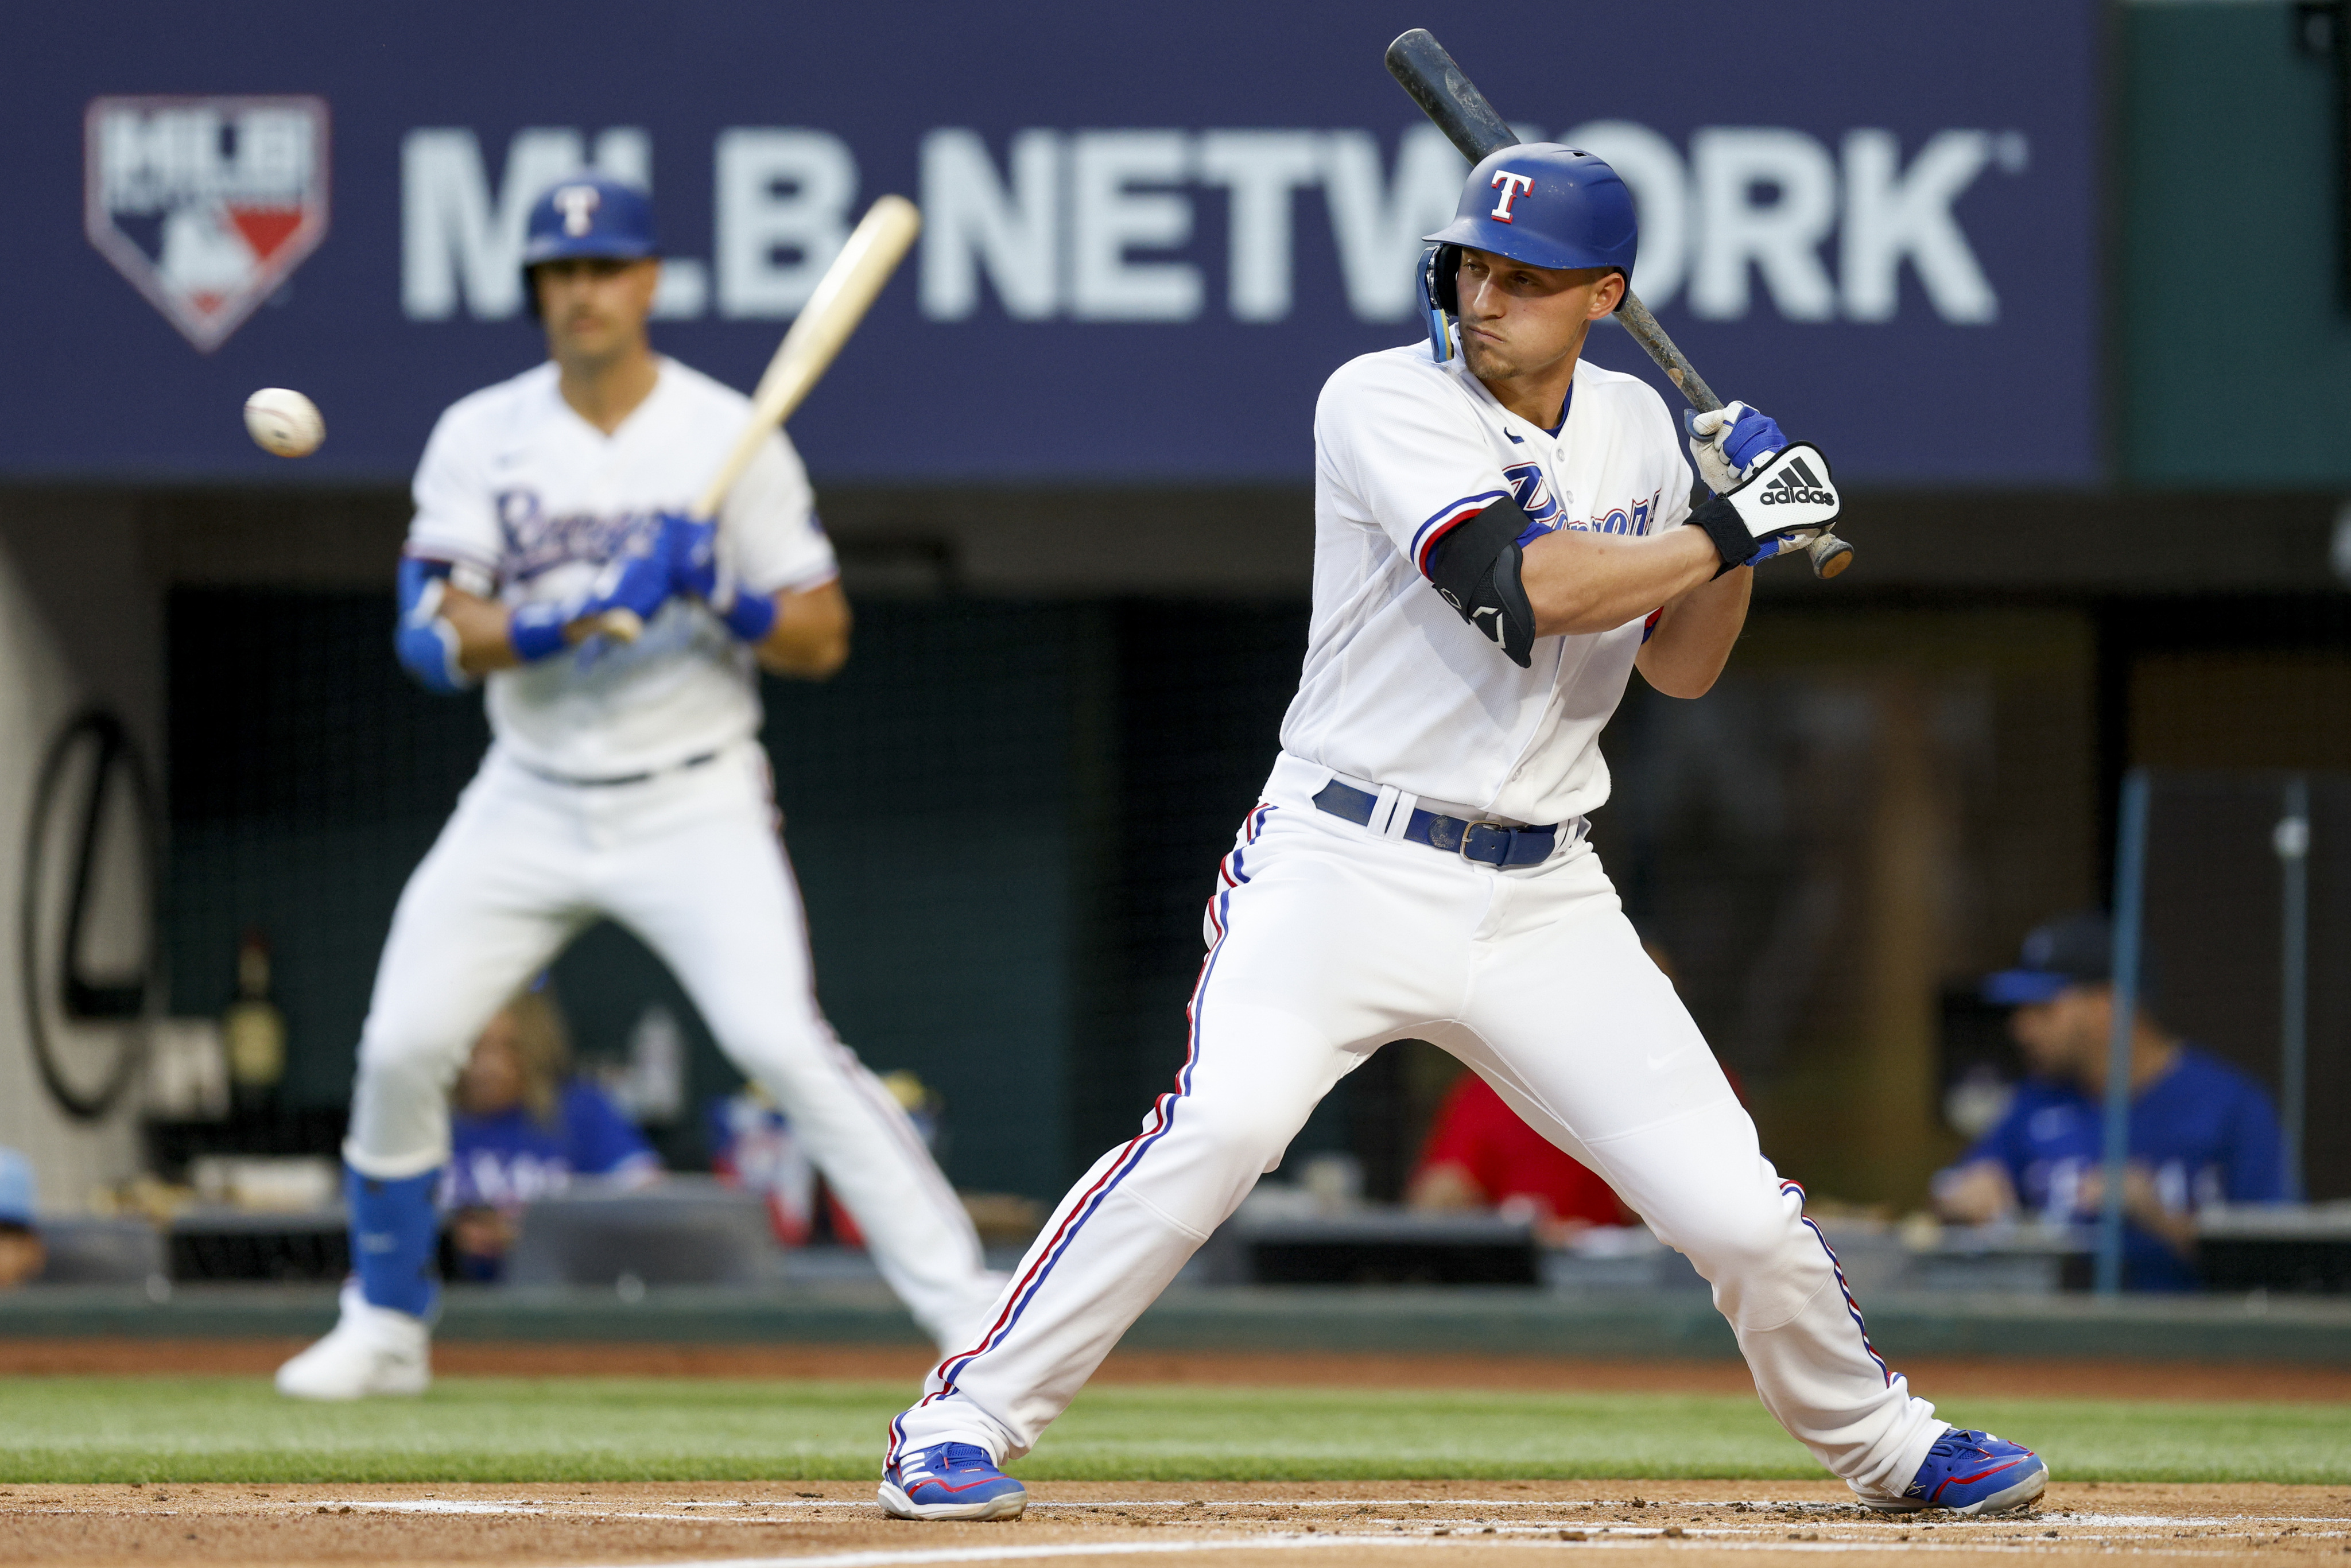 Thursday Newsletter time: Corey Seager has done something in